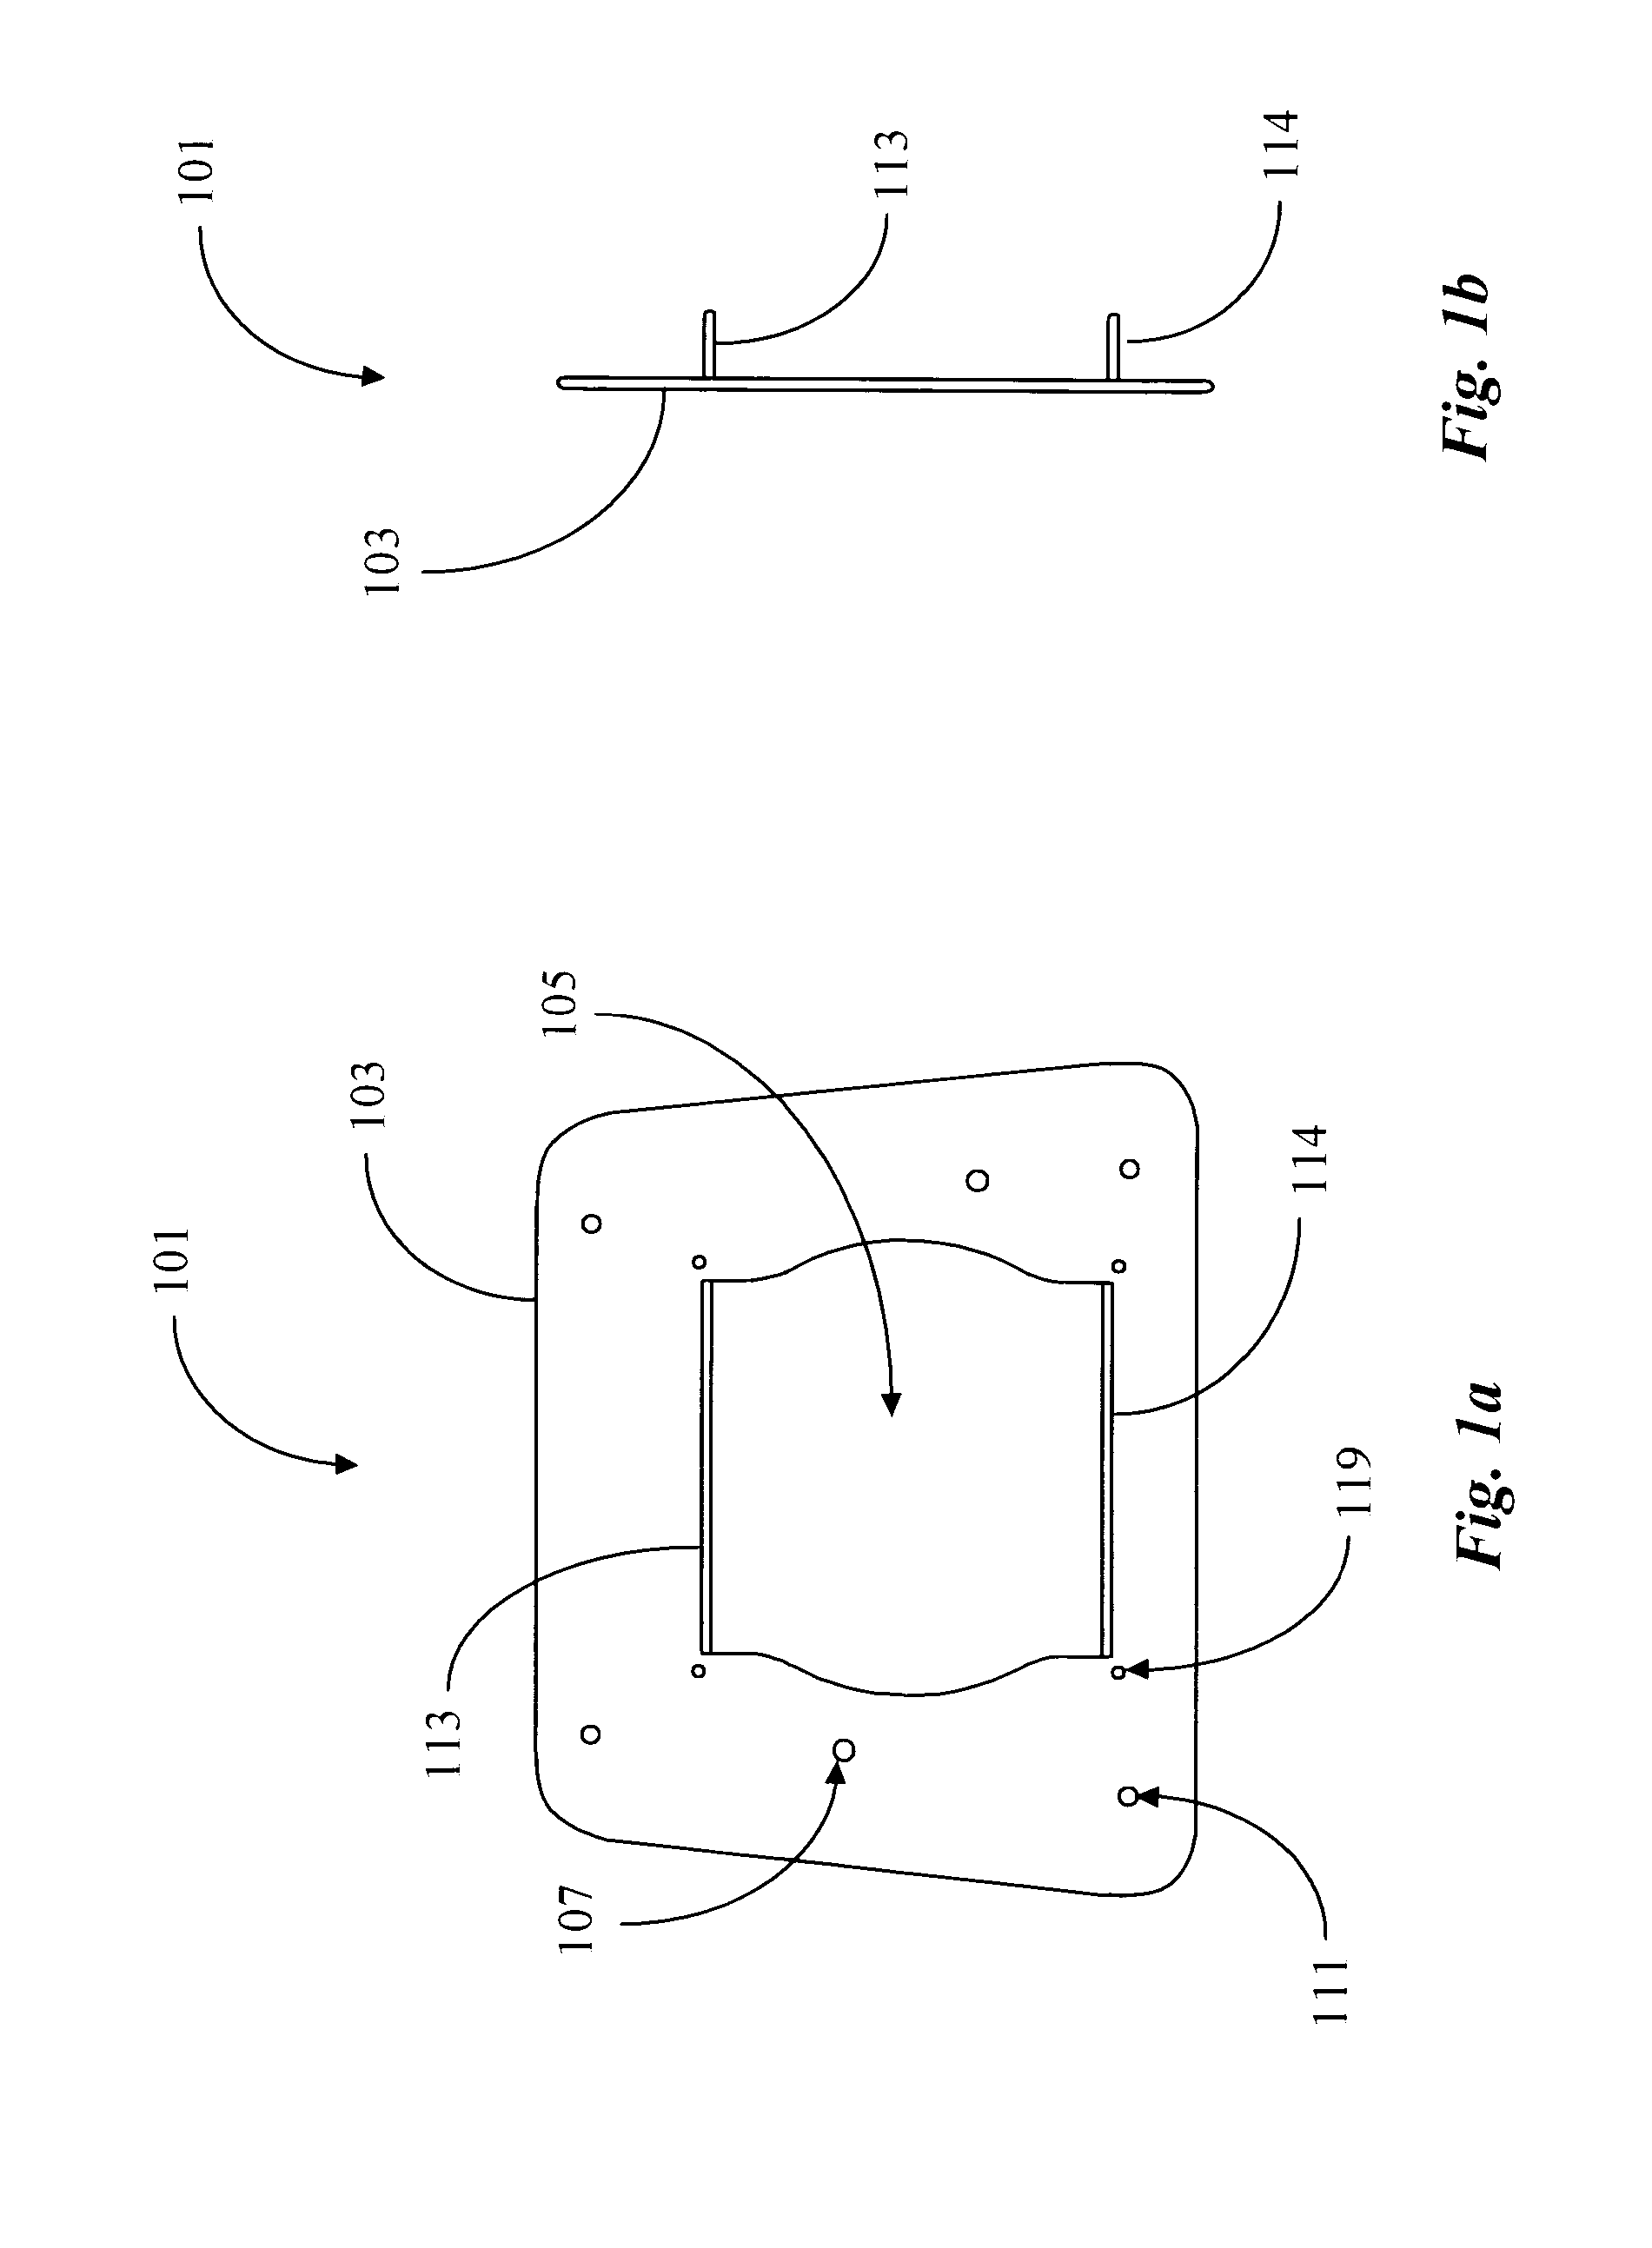 Method and apparatus for efficiently cooling motocycle engines